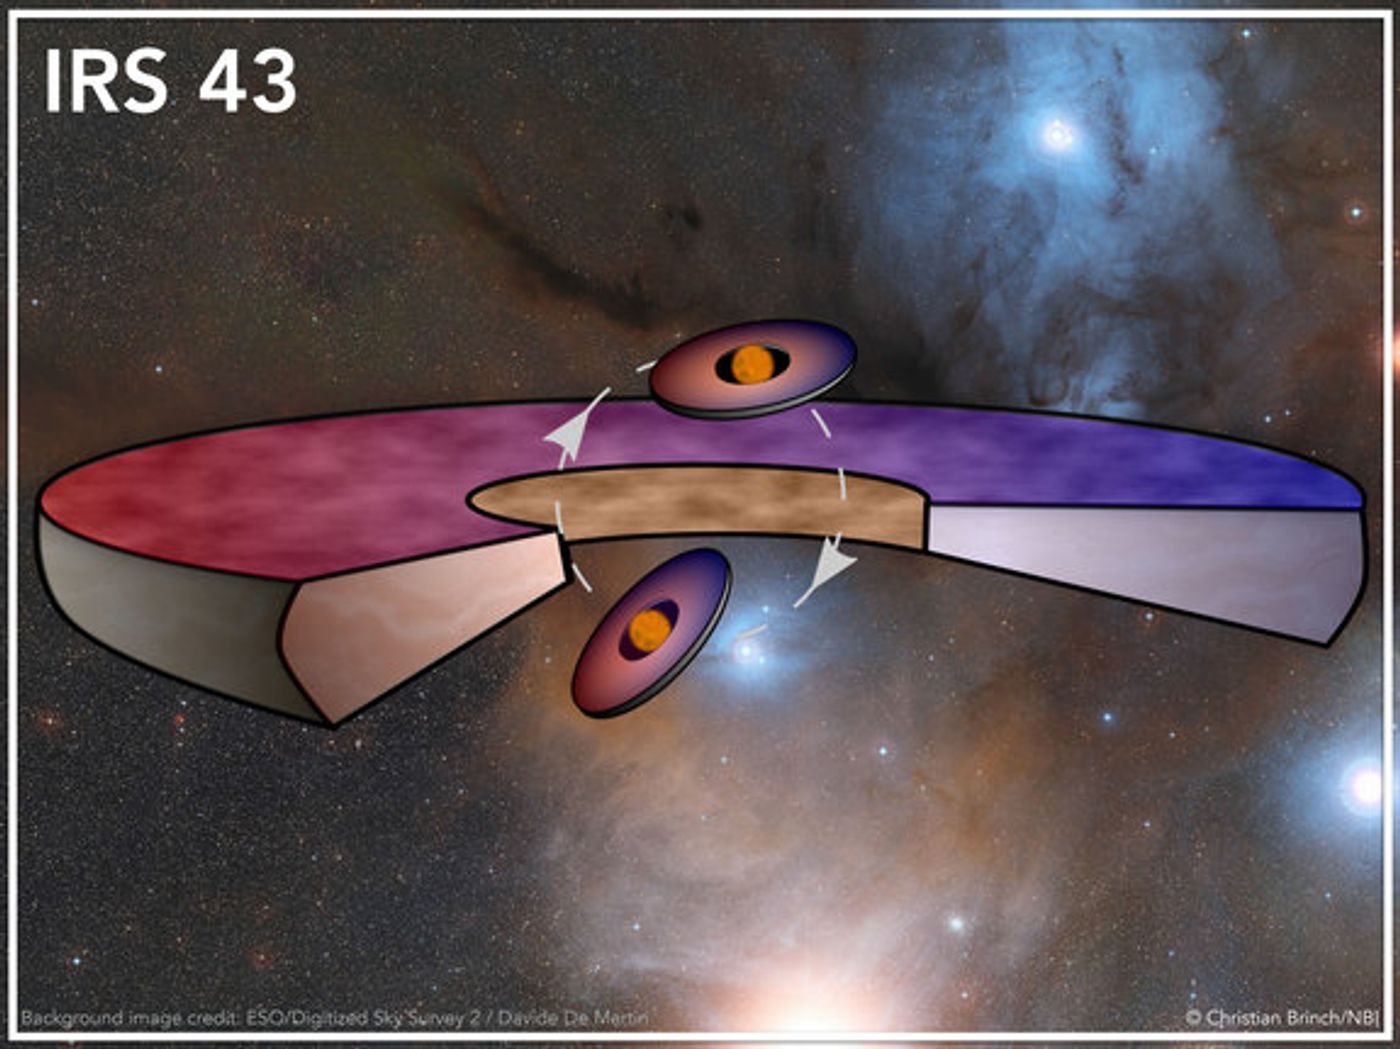 In this system, three accretion disks on different planes exist.